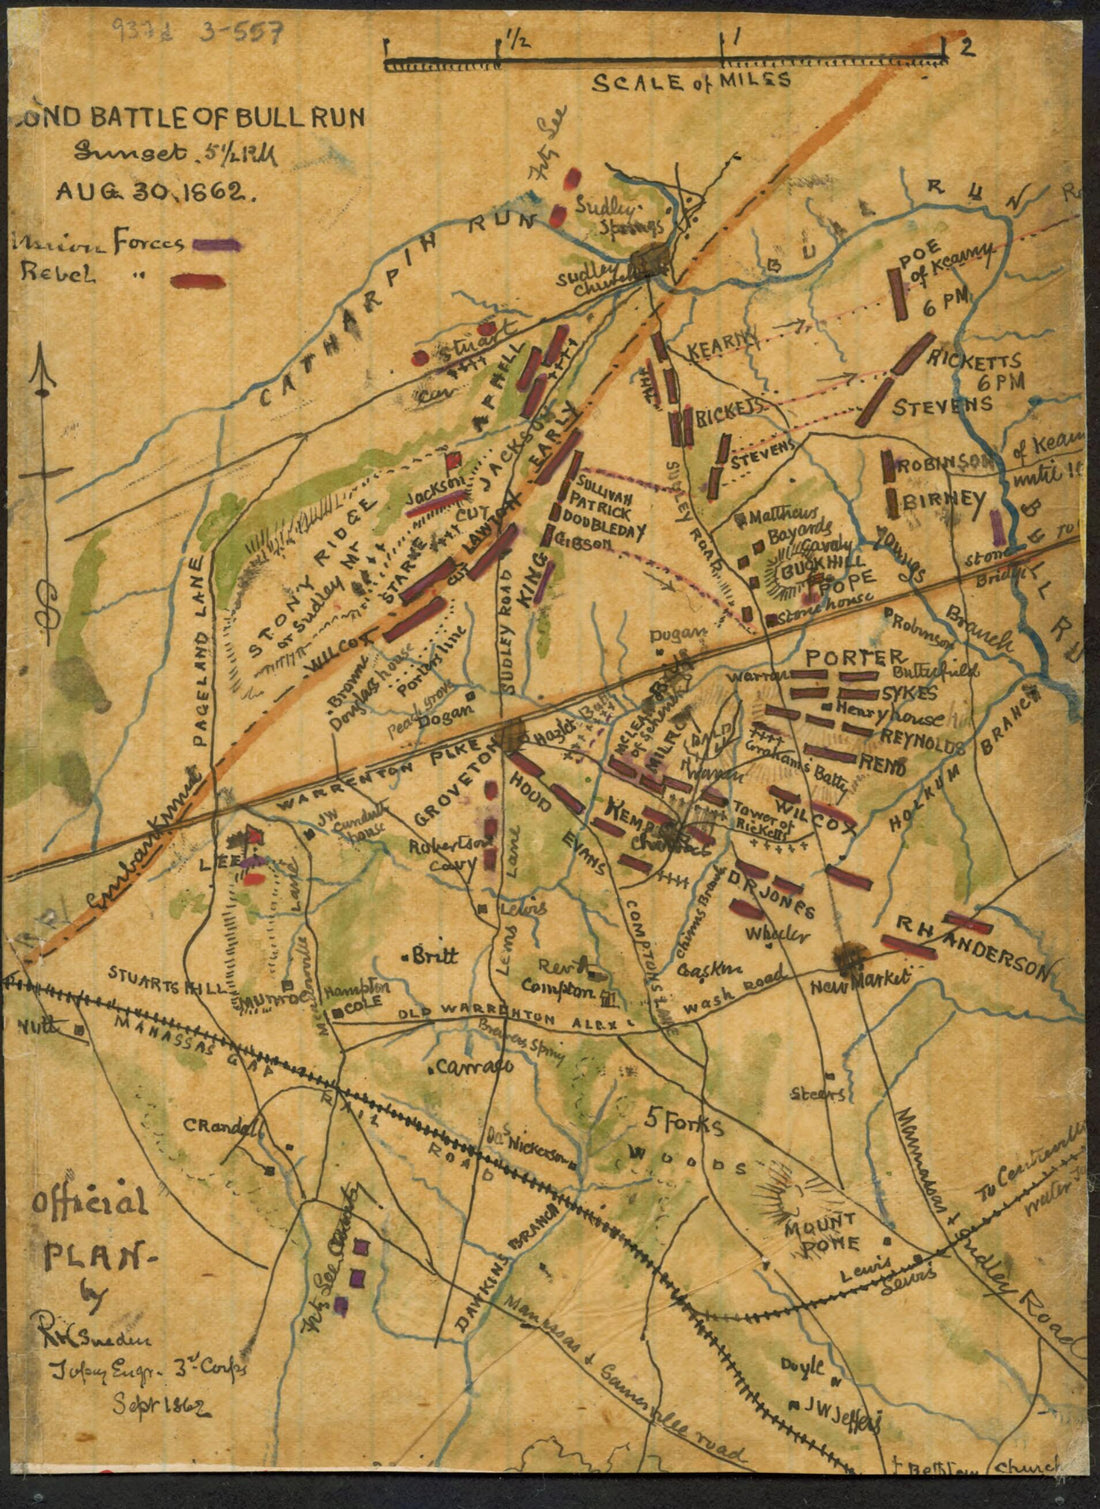 This old map of Second Battle of Bull Run Sunset 5 P.m. Aug 30 1862 from 08-30 was created by Robert Knox Sneden in 08-30